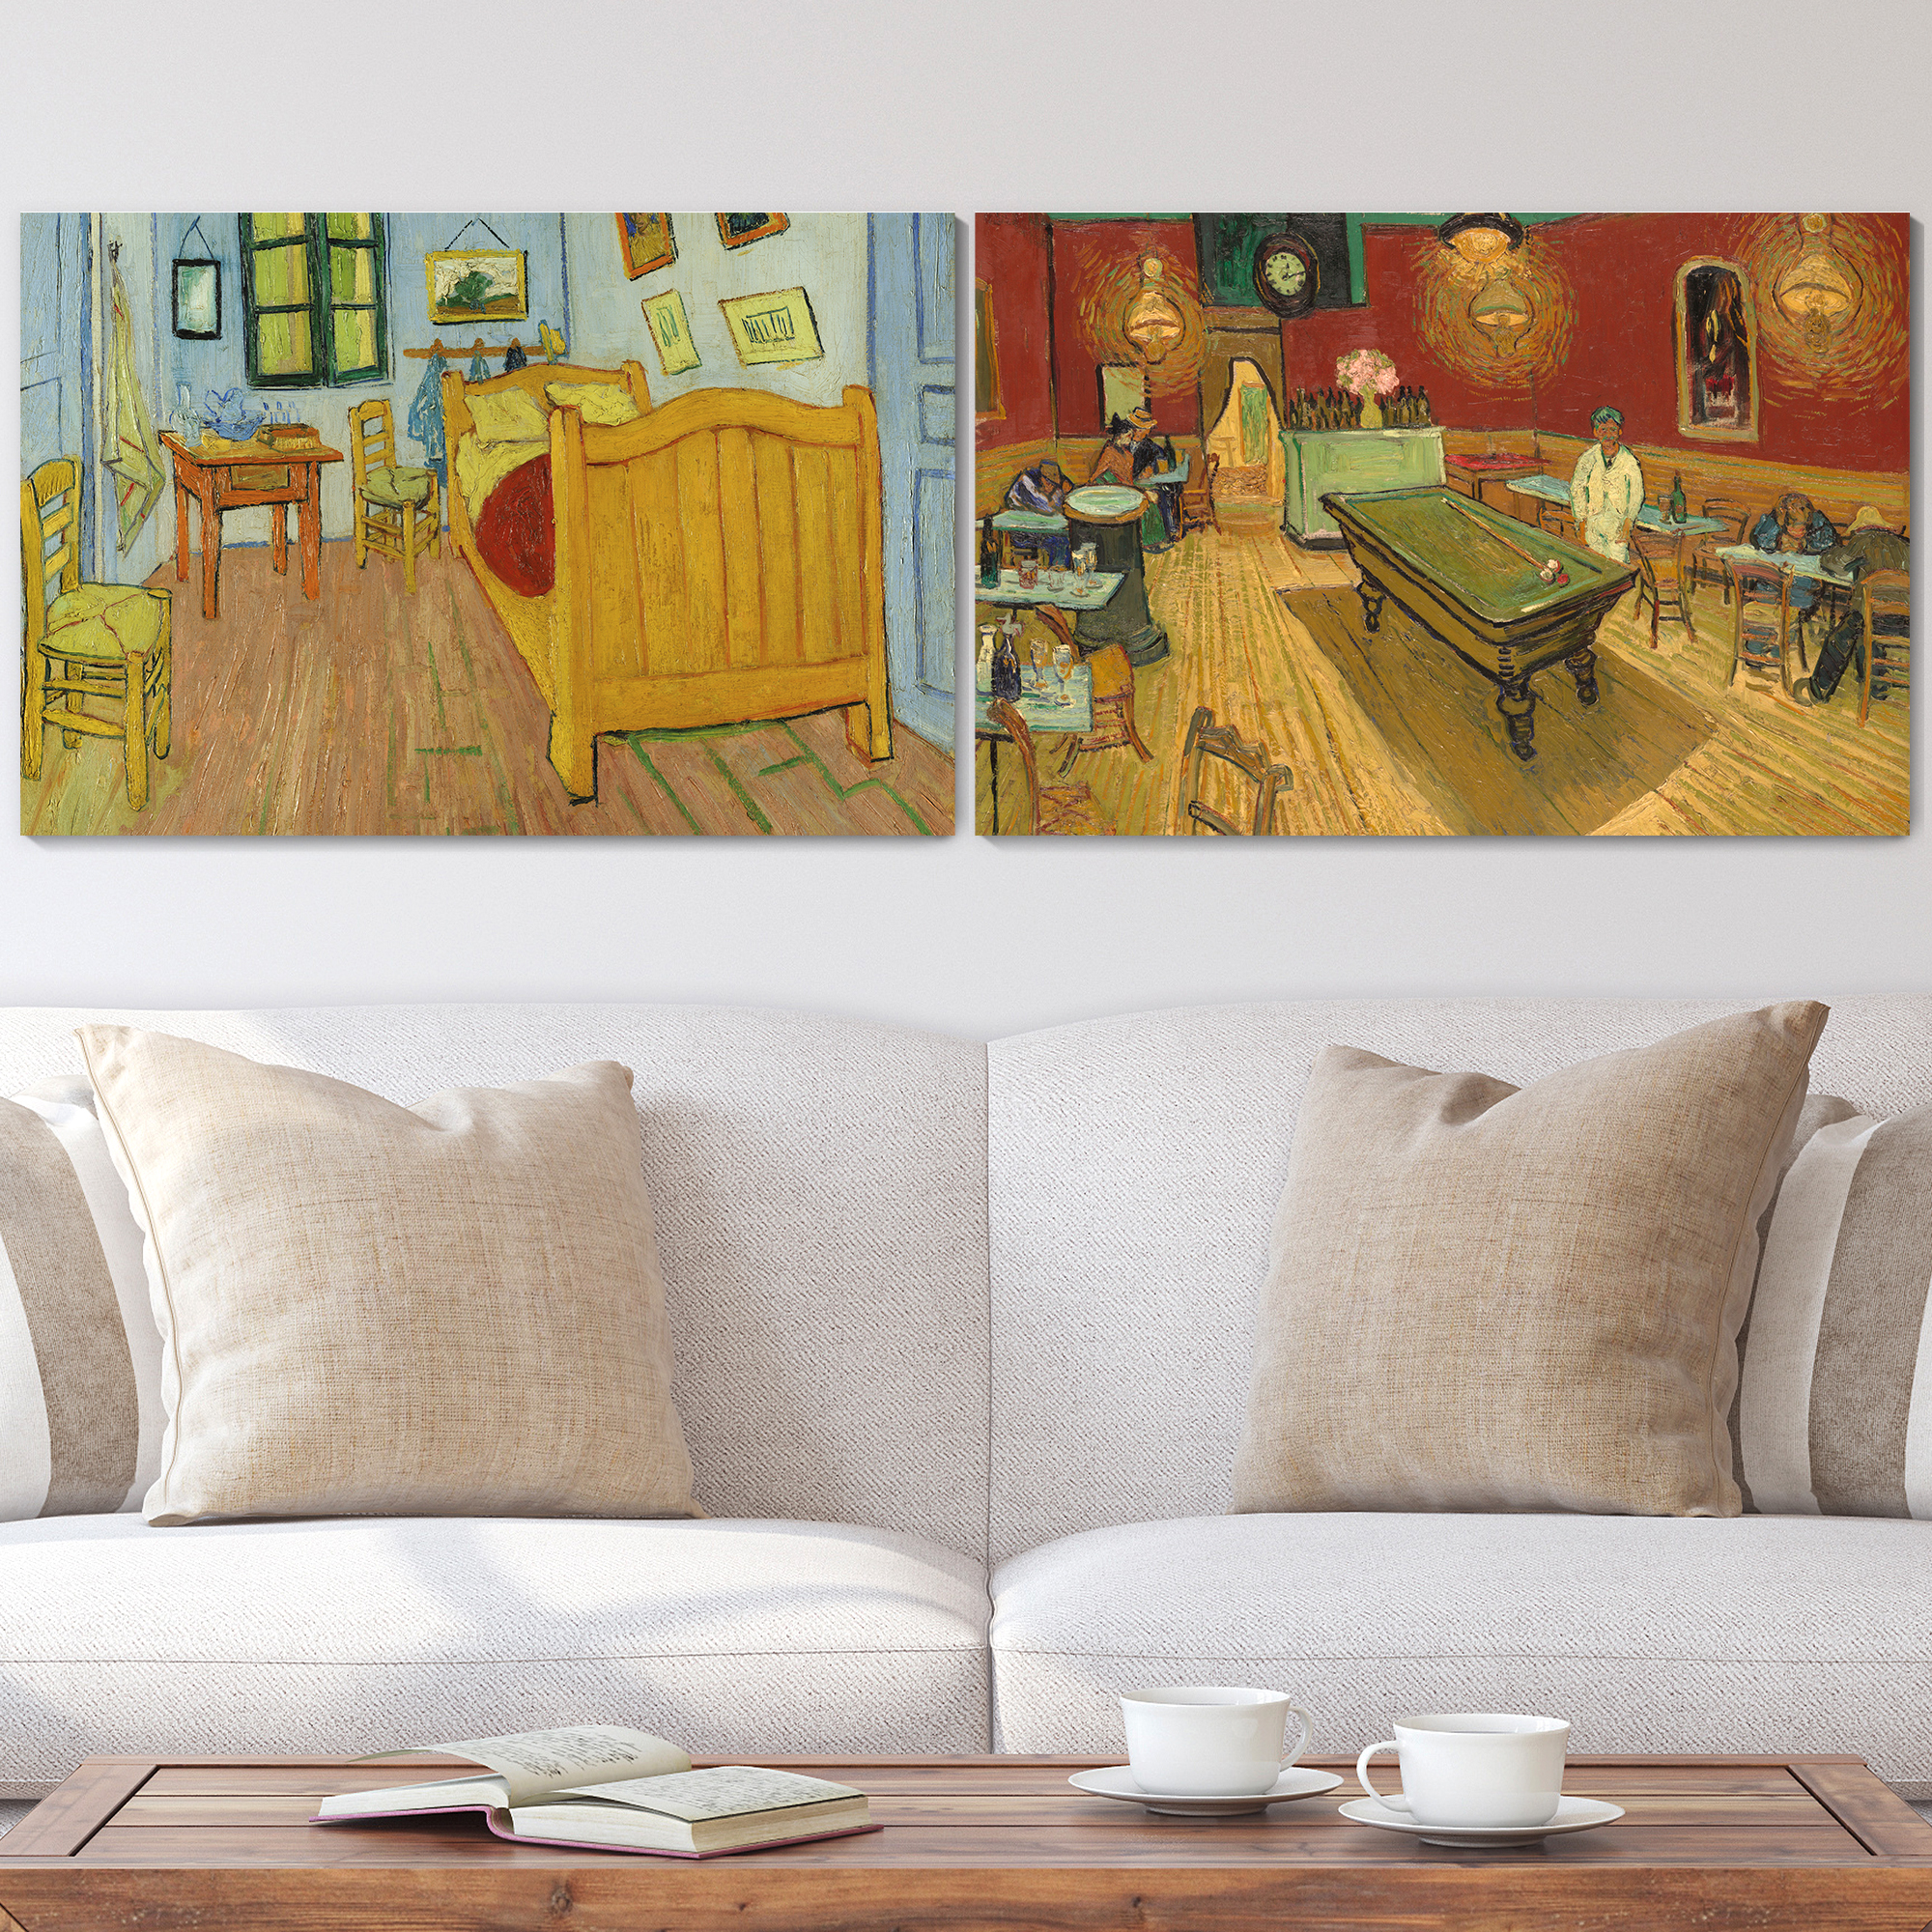 Bedroom/The Night Café by Vincent Van Gogh - Oil Painting Reproduction in Set of 2 | Canvas Prints Wall Art, Ready to Hang - 16